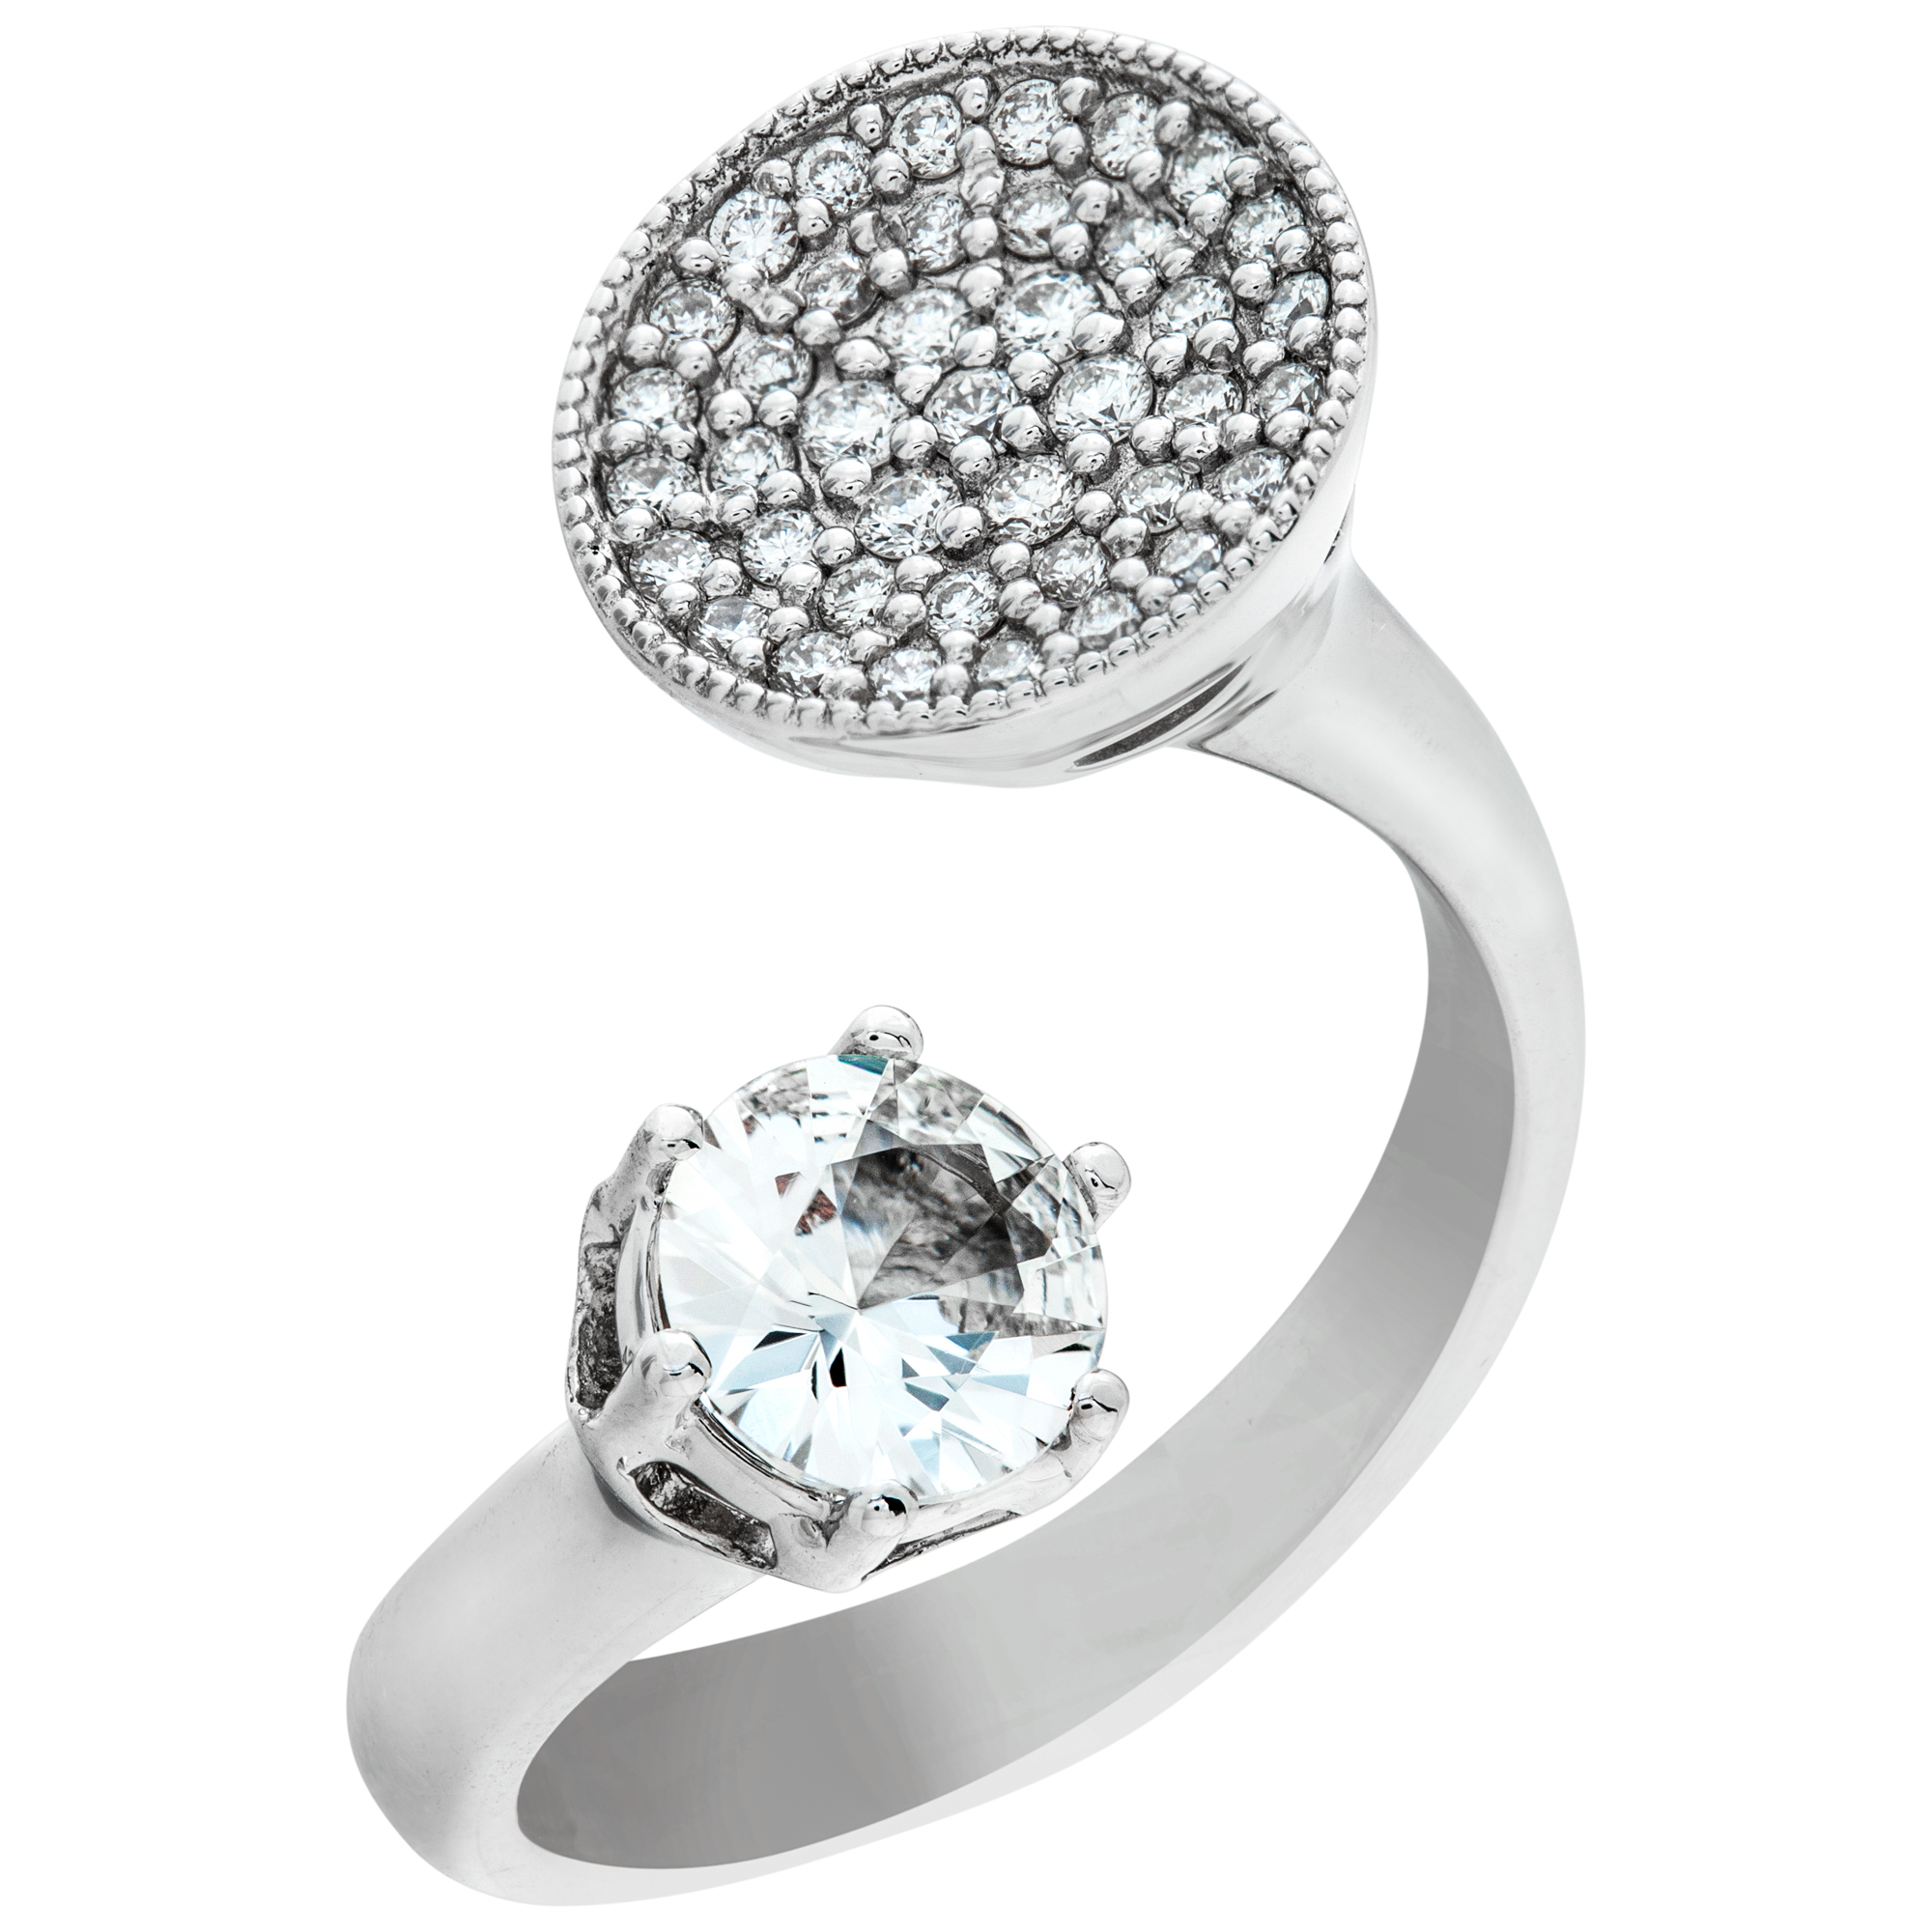 Pave Diamond and white sapphire ring set in 18k white gold. Size 5.75 image 3